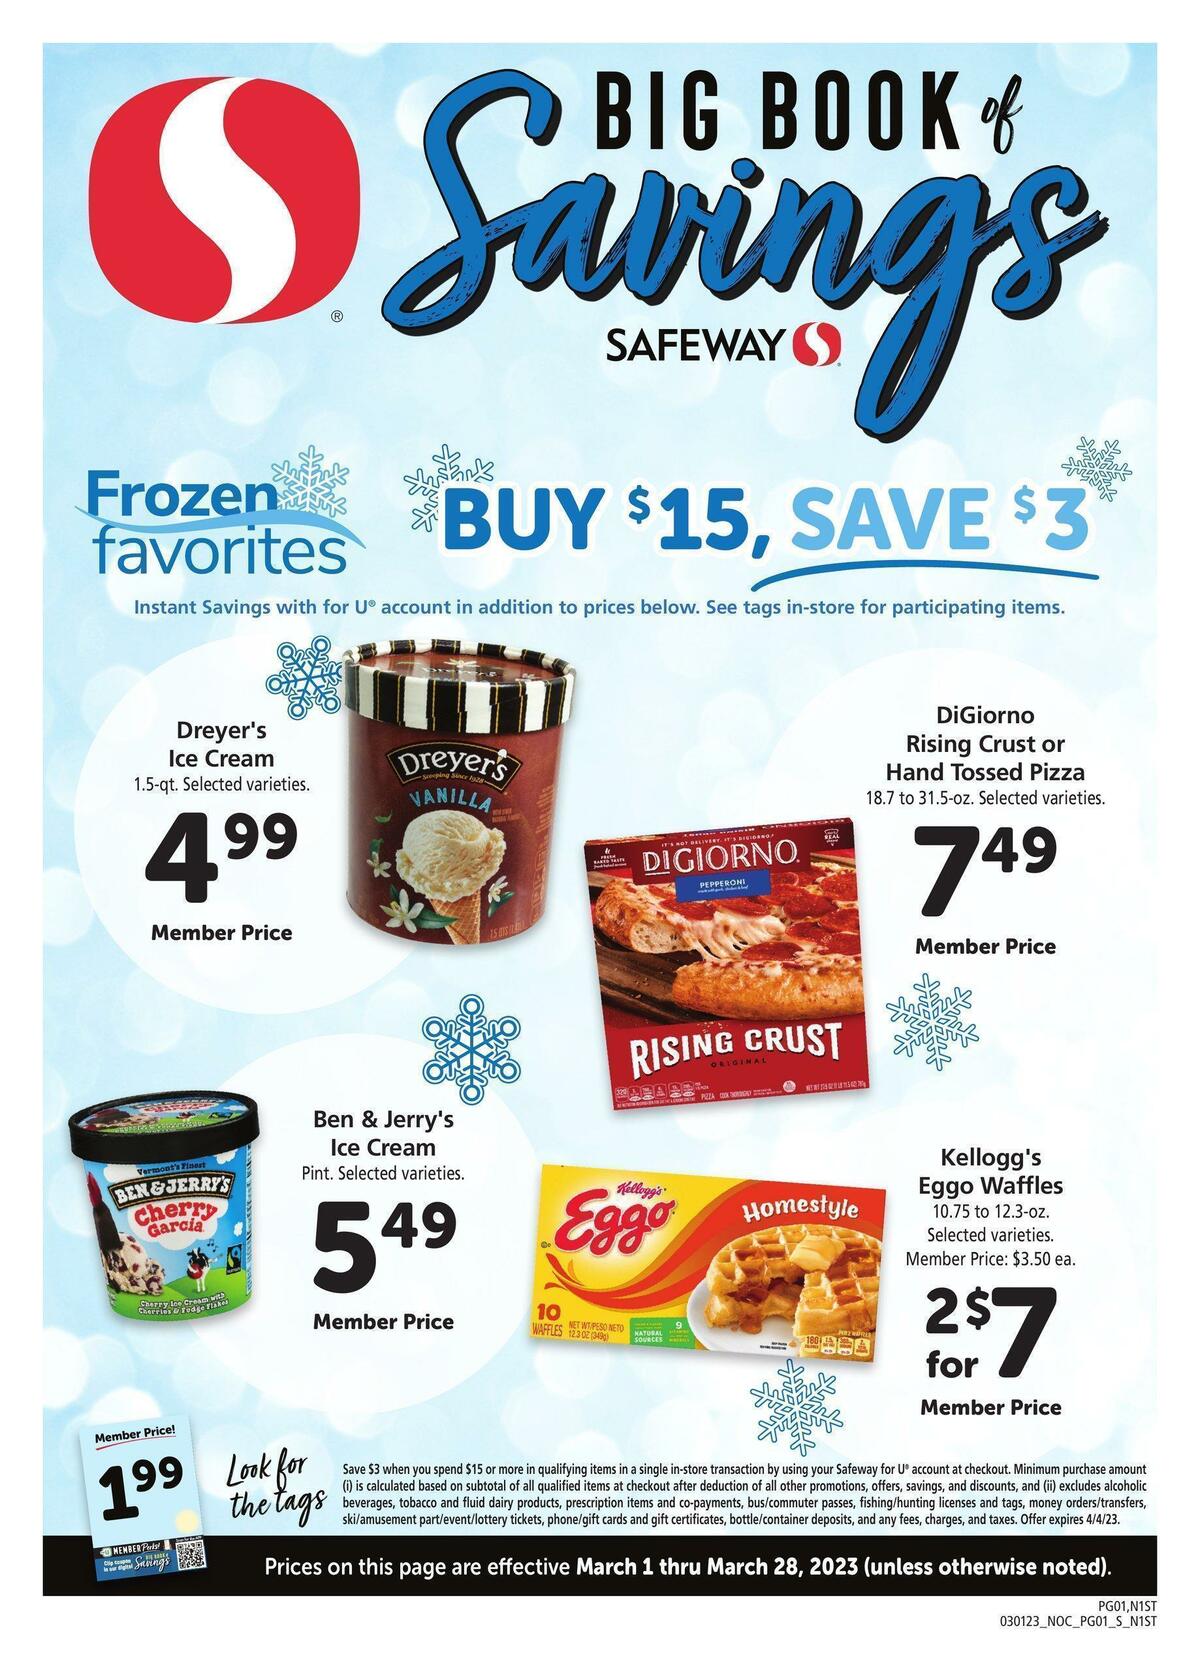 Safeway Big Book of Savings Weekly Ad from March 1